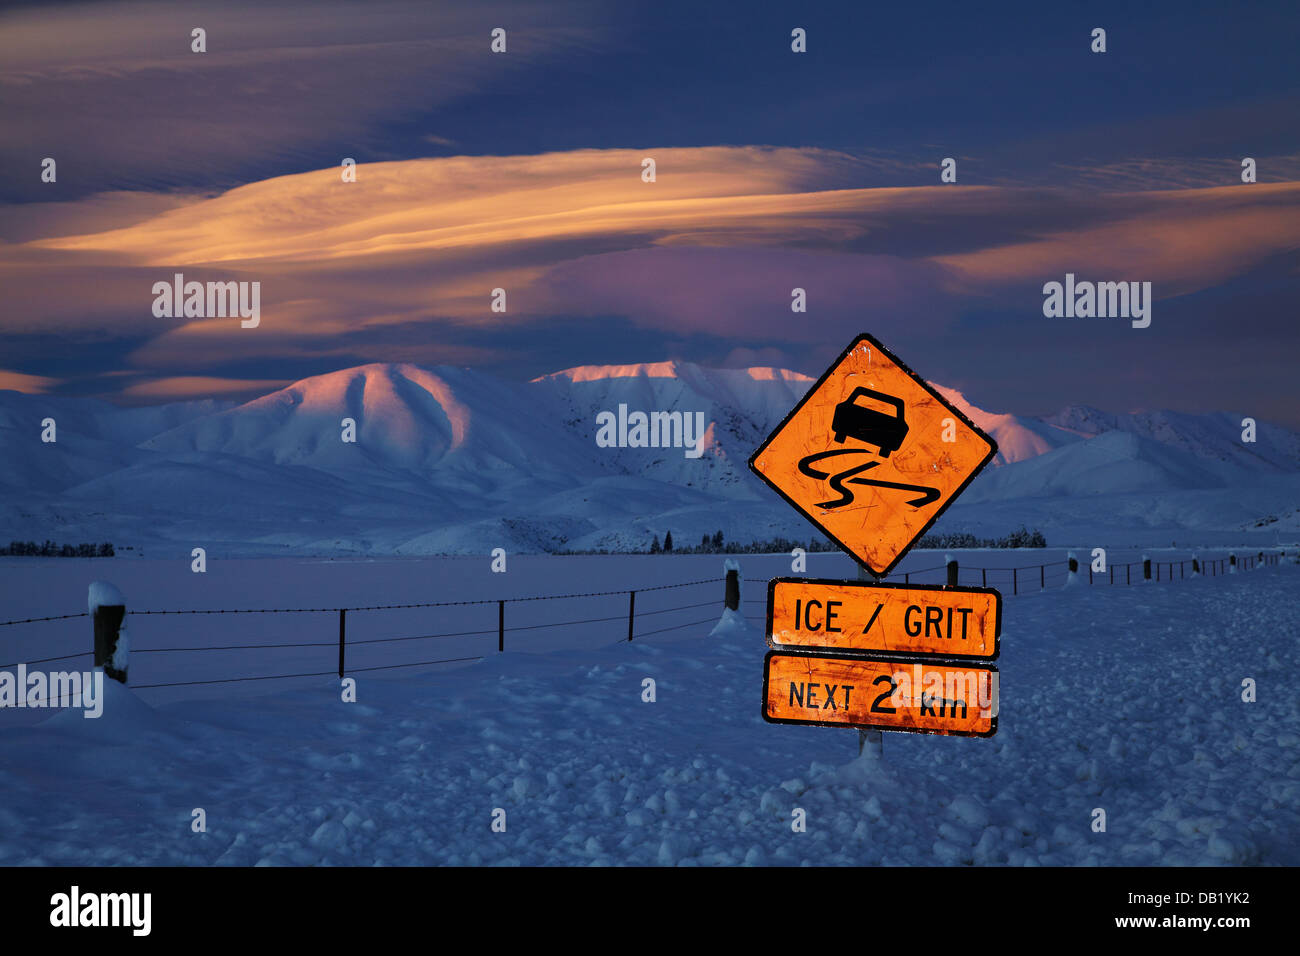 Icy road warning sign and alpenglow on Hawkdun Range, and lenticular clouds, Maniototo, Central Otago, South Island, New Zealand Stock Photo